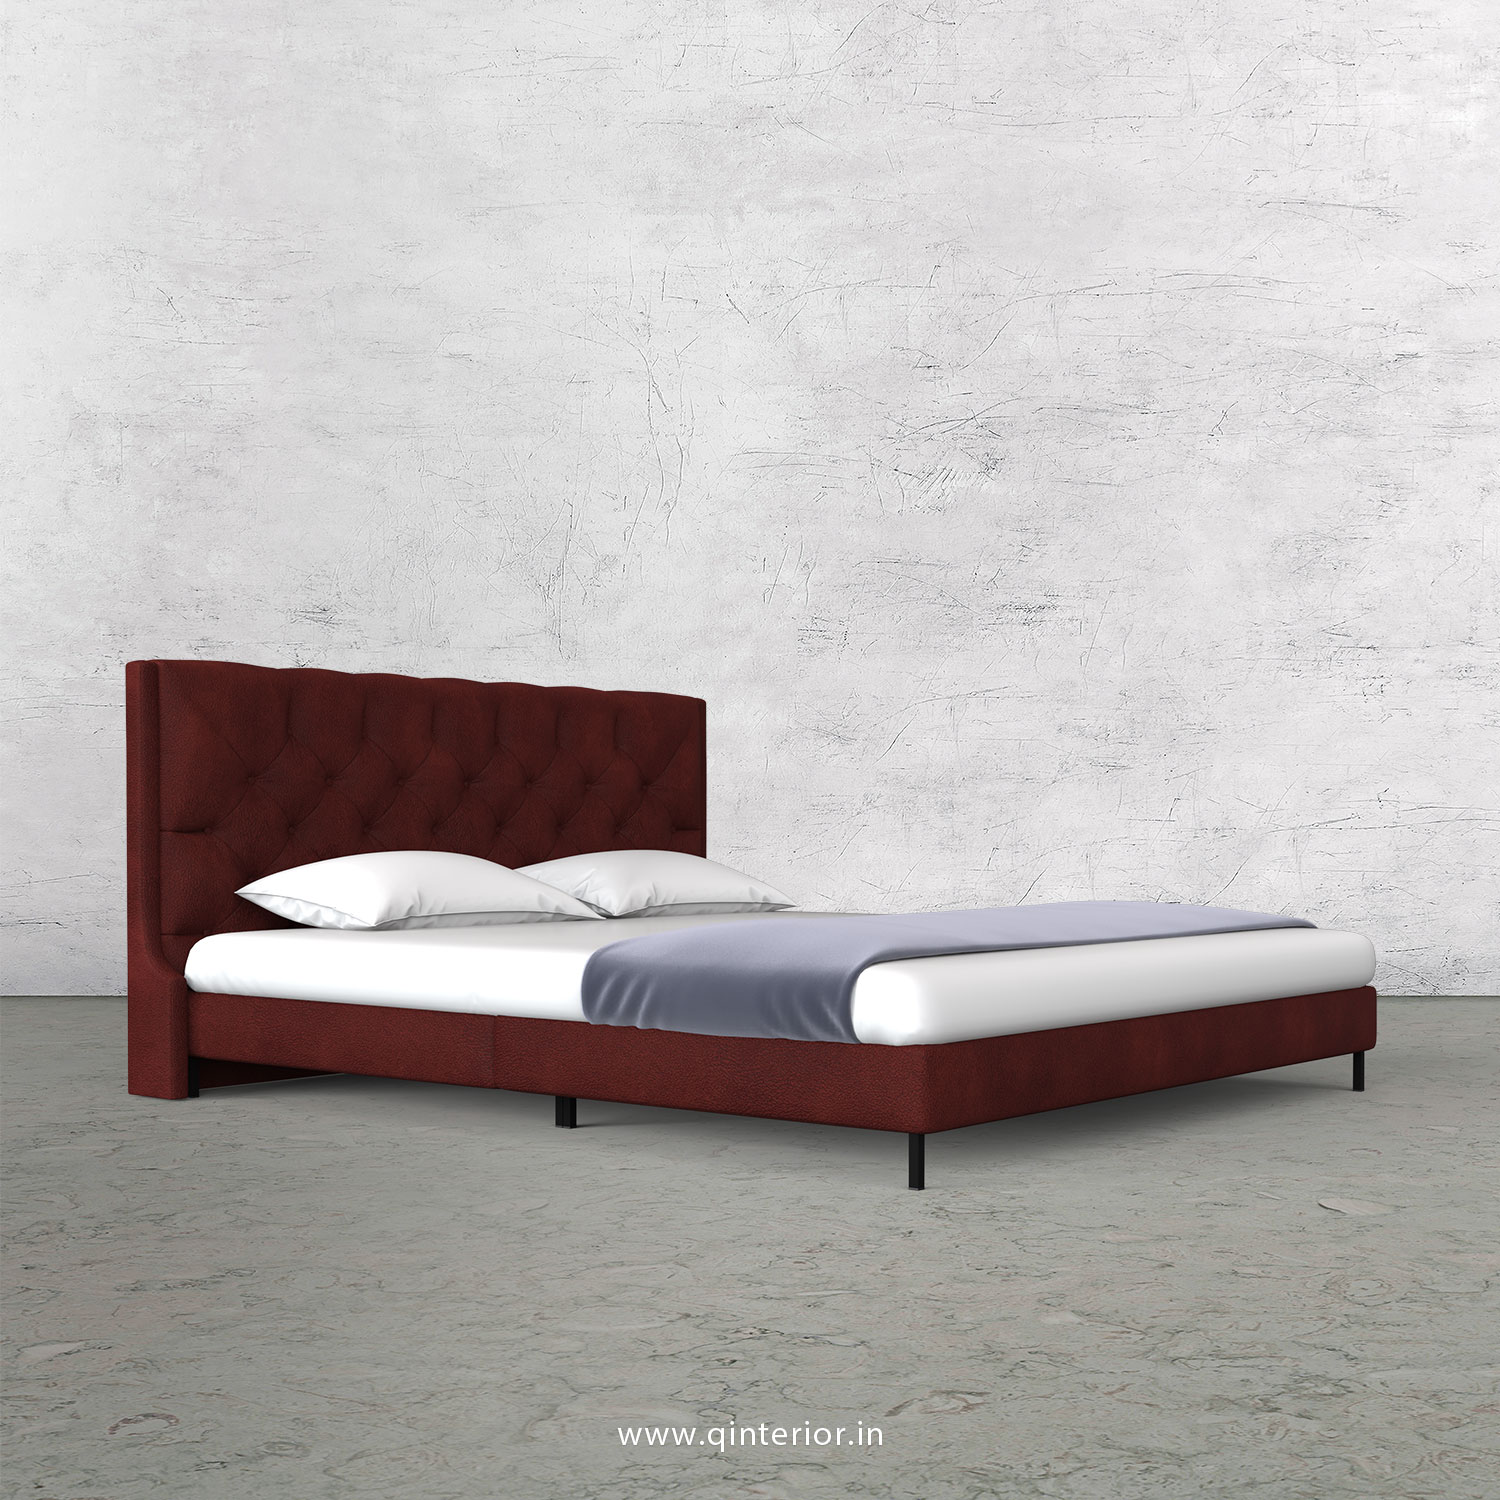 Scorpius King Size Bed in Fab Leather Fabric - KBD003 FL08